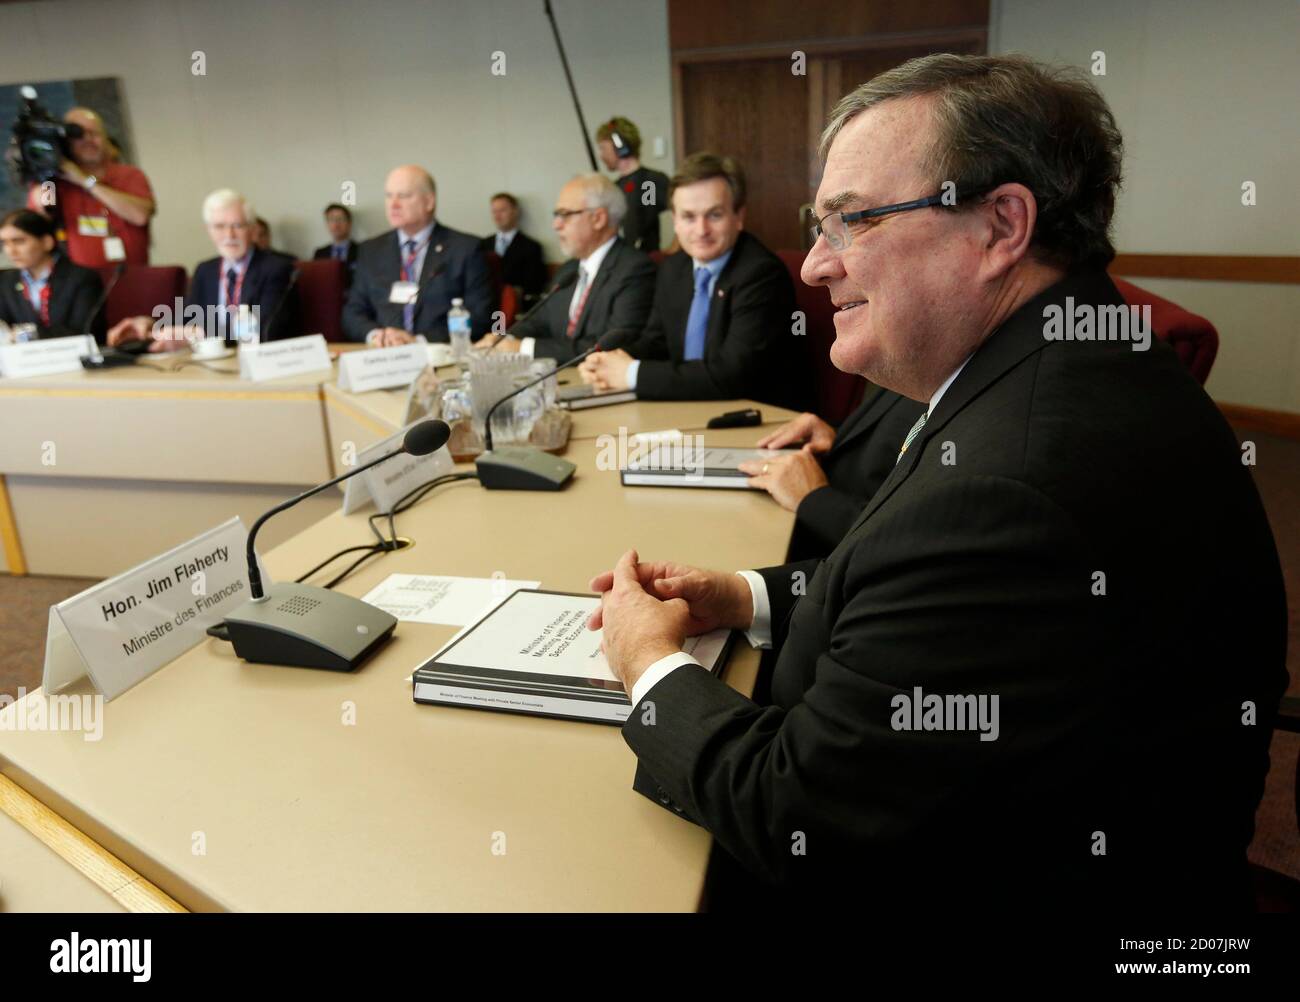 Canada's Finance Minister Jim Flaherty meets with private sector economists in Ottawa October 28, 2013. REUTERS/Chris Wattie (CANADA - Tags: POLITICS BUSINESS) Stock Photo